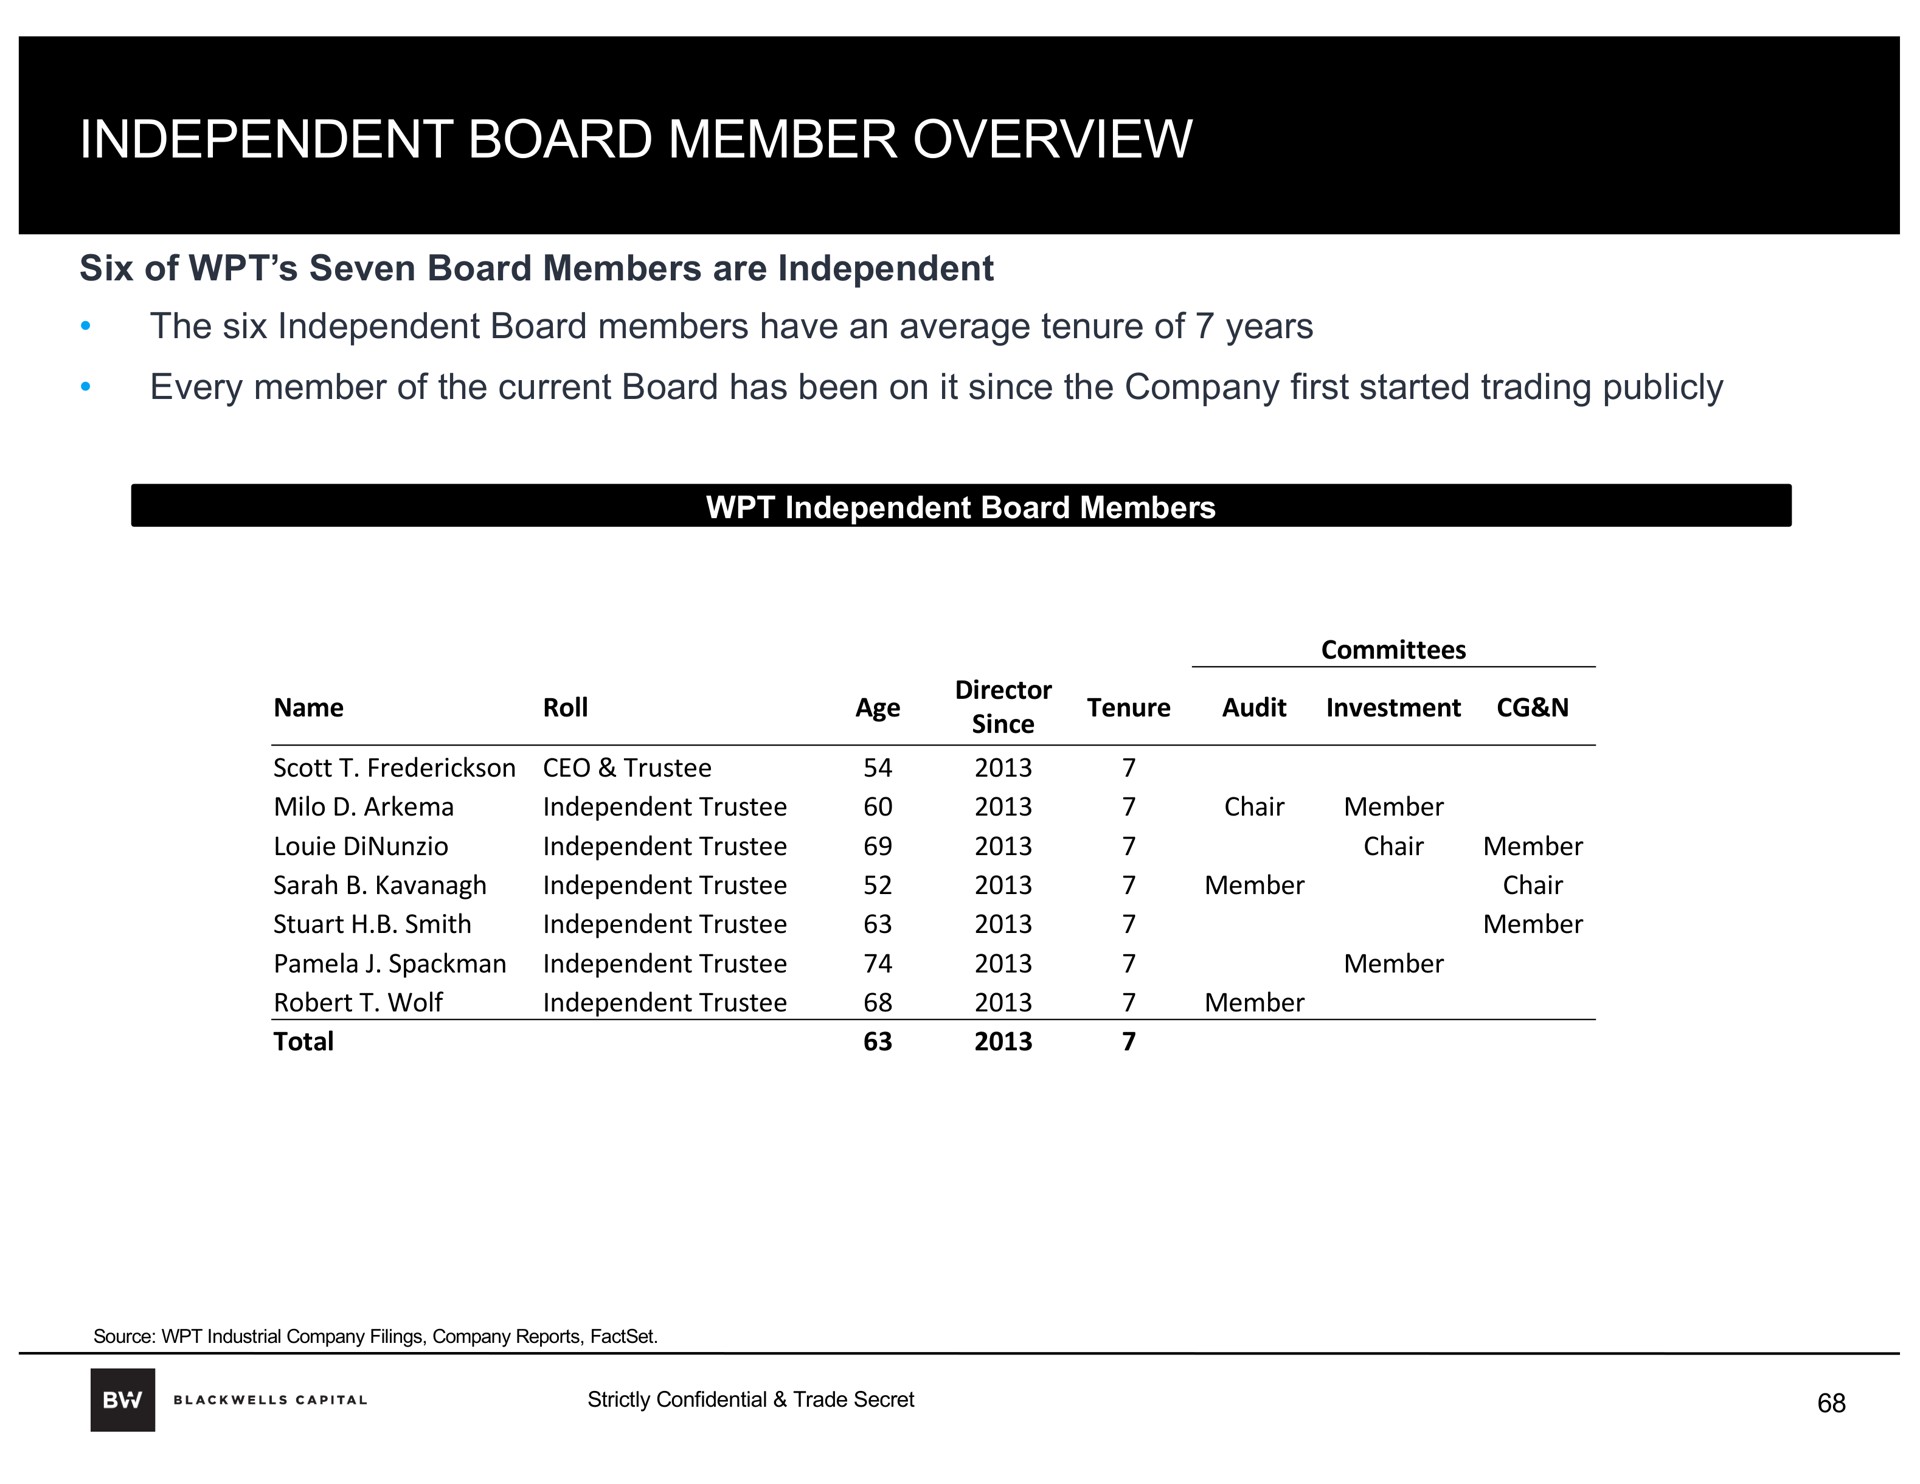 independent board member overview | Blackwells Capital